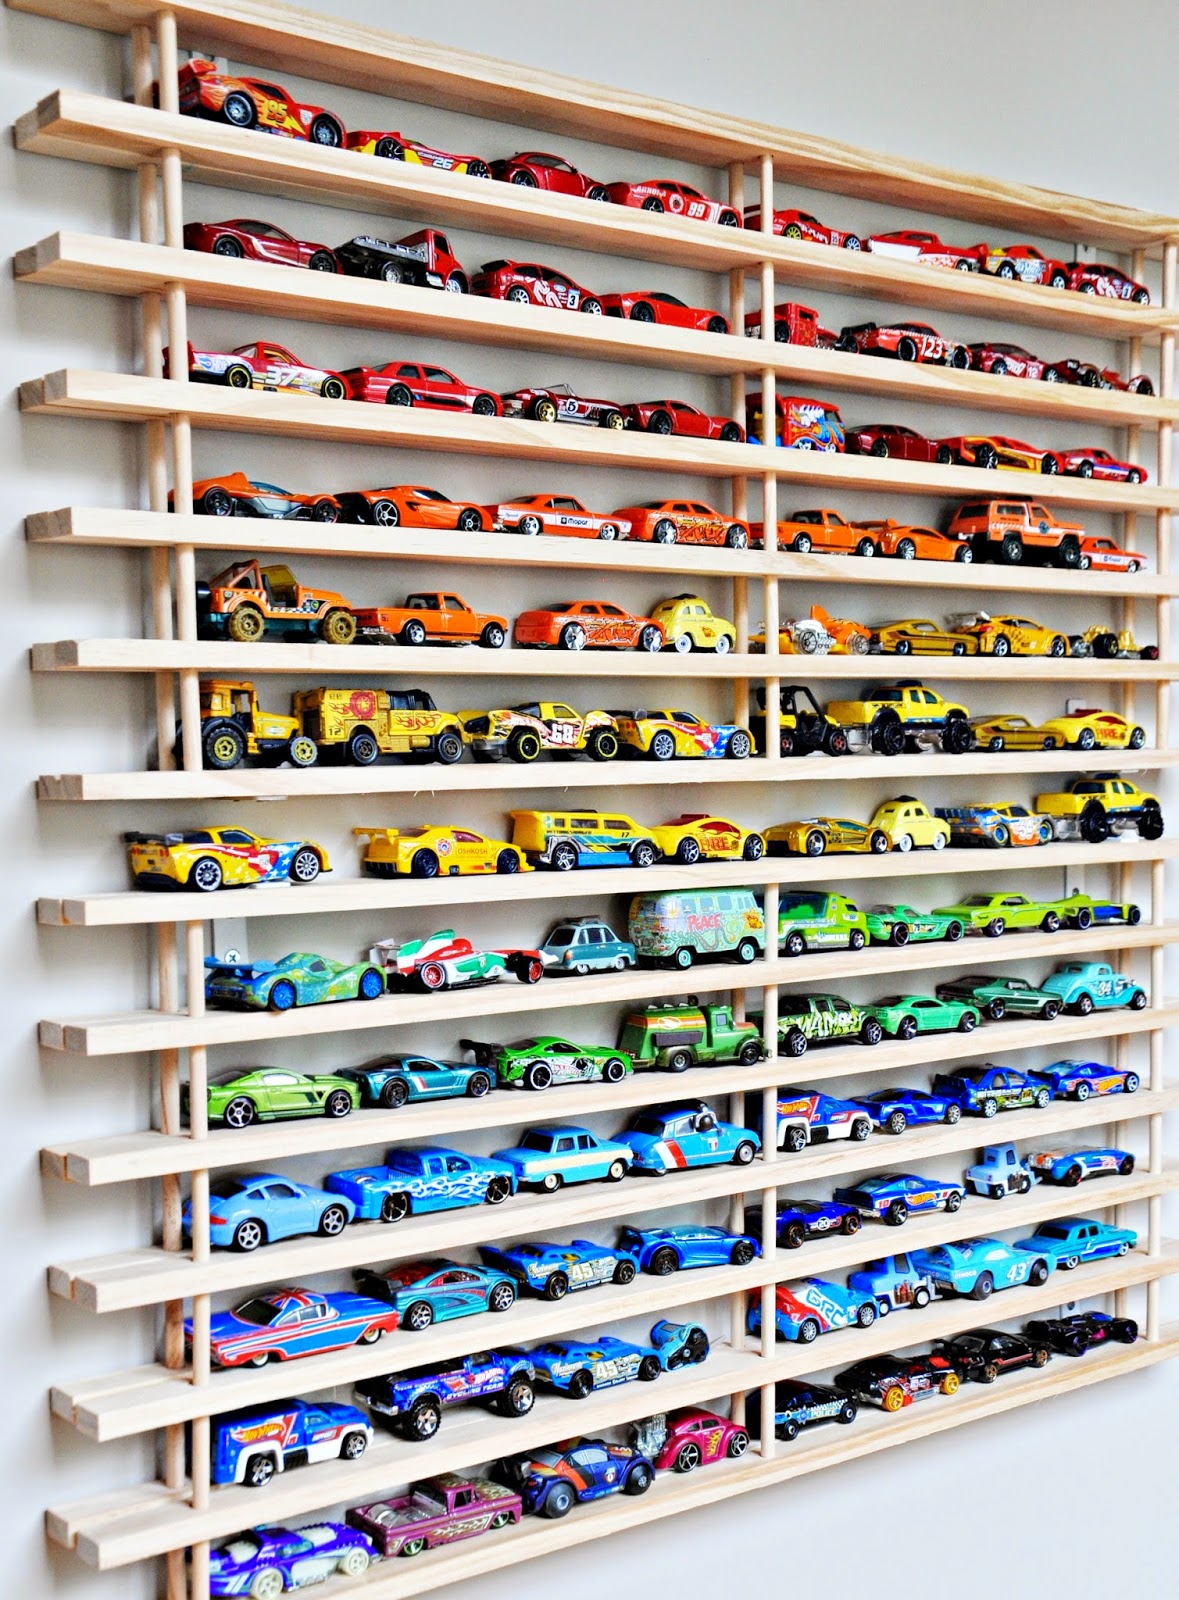 This matchbox car garage not only does it keep those cars off the floor, but it’s a super cool way to decorate a room